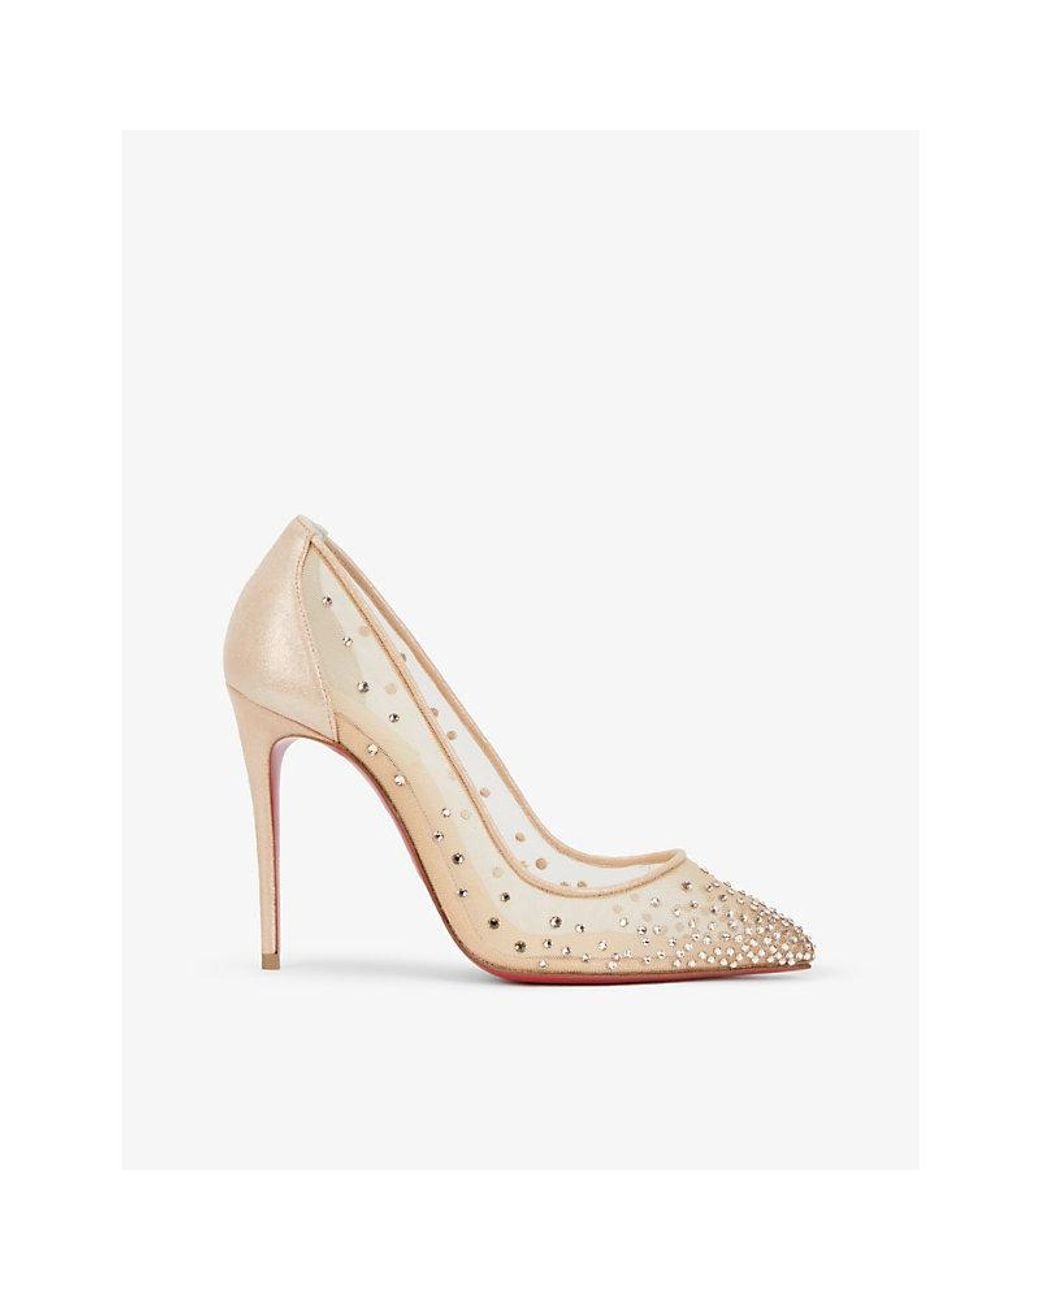 Follies Strass Embellished Mesh Pumps in Pink - Christian